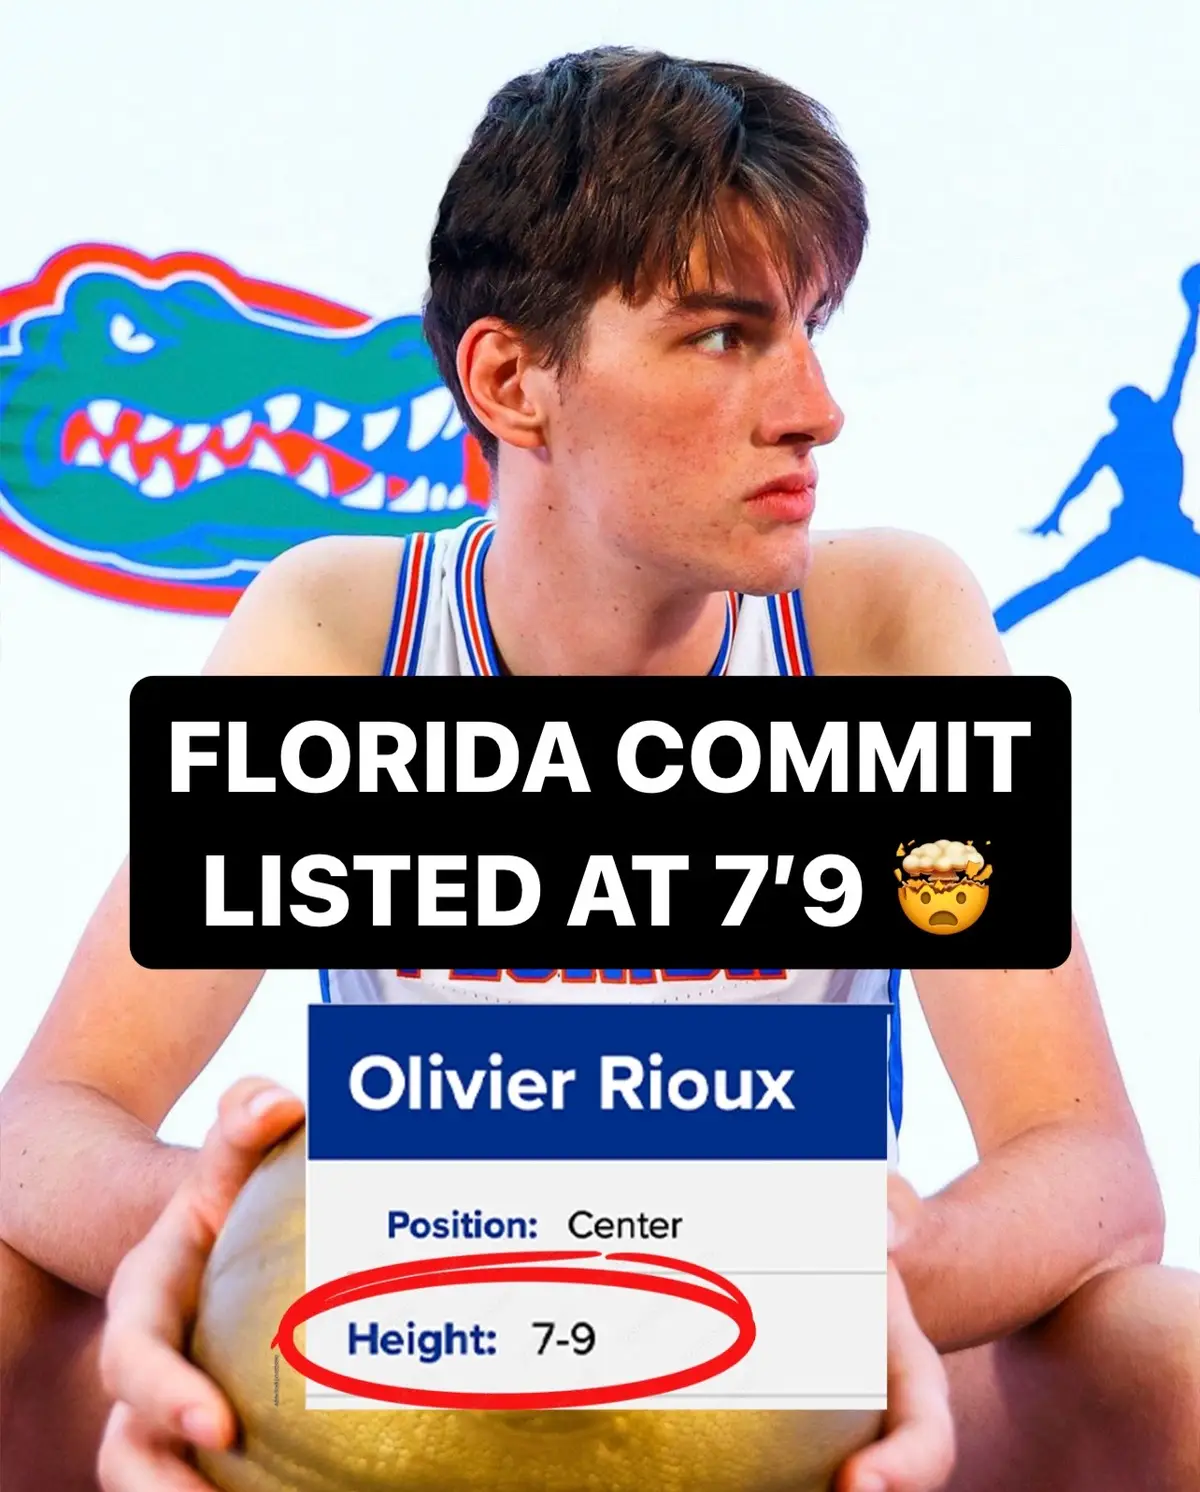 Florida commit Olivier Rioux is the tallest teenager in the world at 7’9 🤯😳 (via olivier.roux/IG) #basketball #cbb #highschool #basketball🏀 